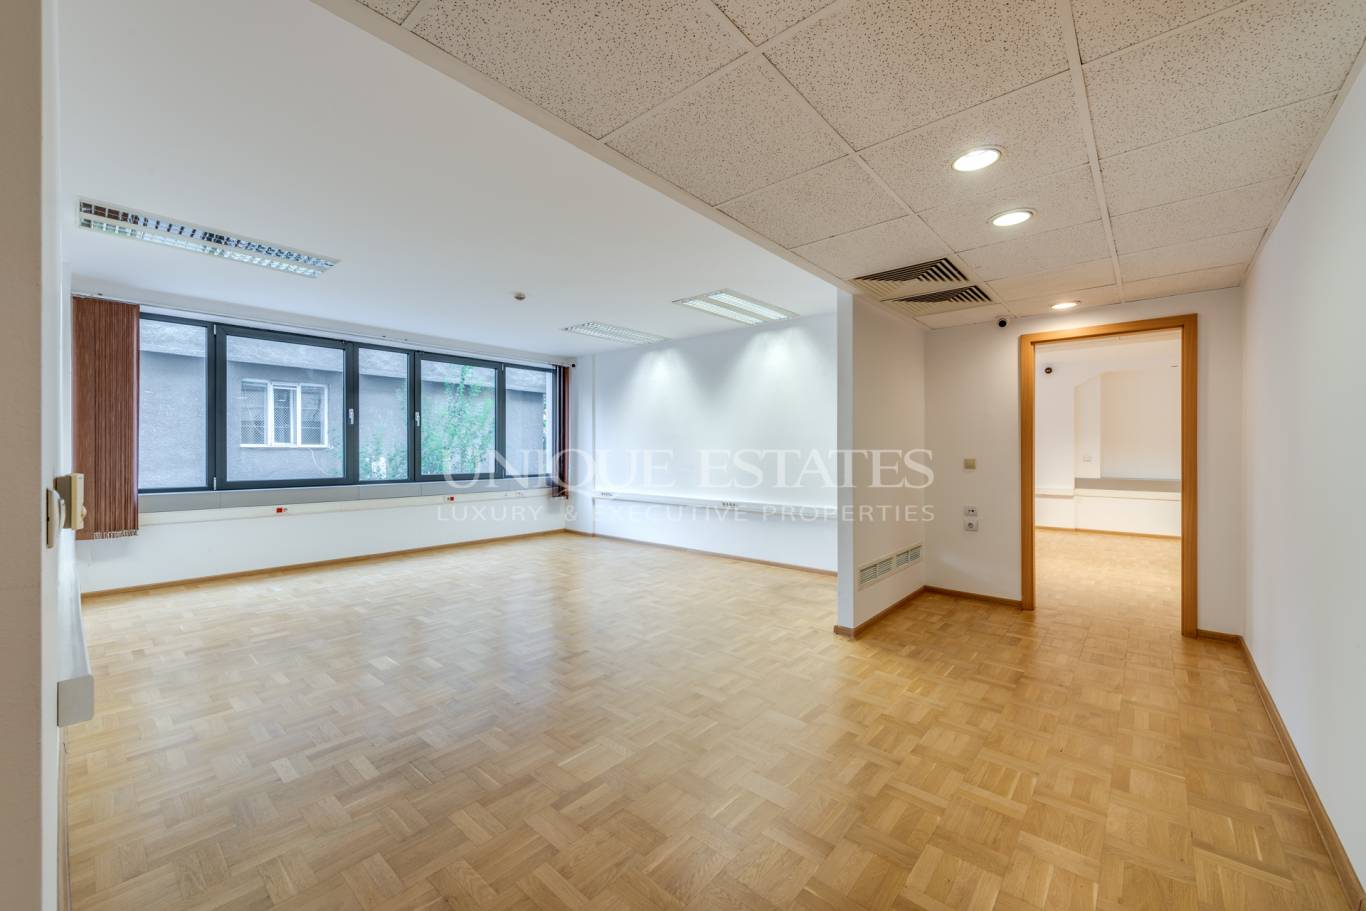 Office for rent in Sofia, Downtown with listing ID: K14005 - image 3